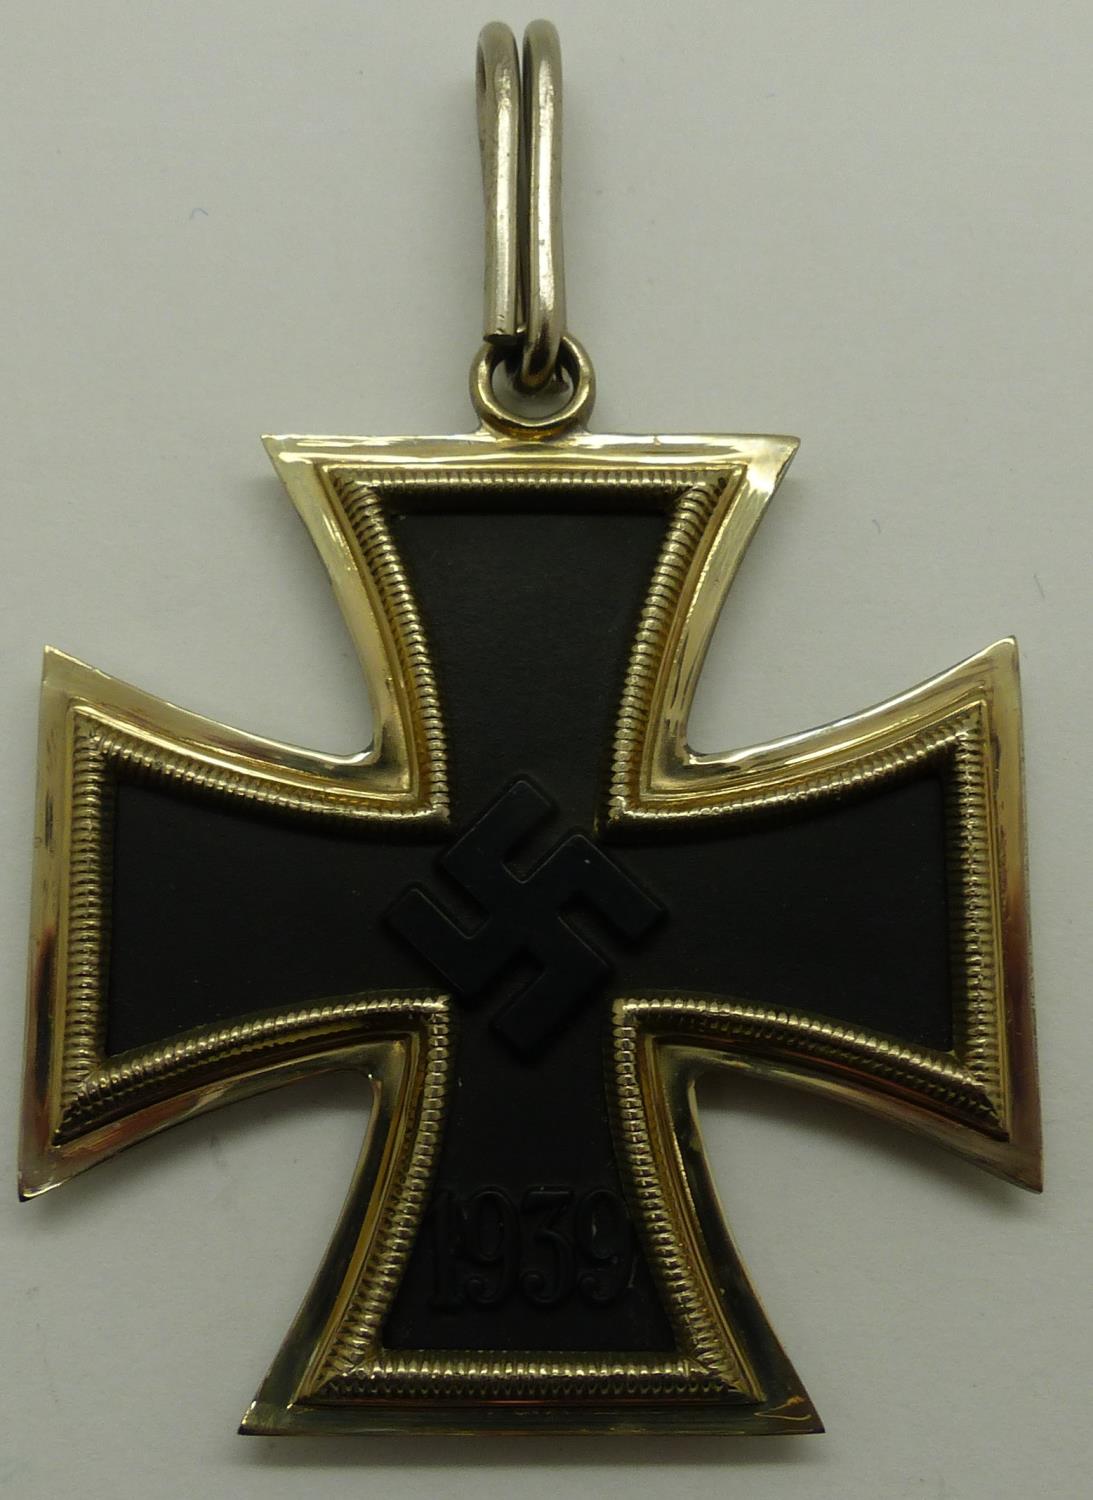 German Knights Cross of the Iron Cross, stamped 24. P&P Group 1 (£14+VAT for the first lot and £1+